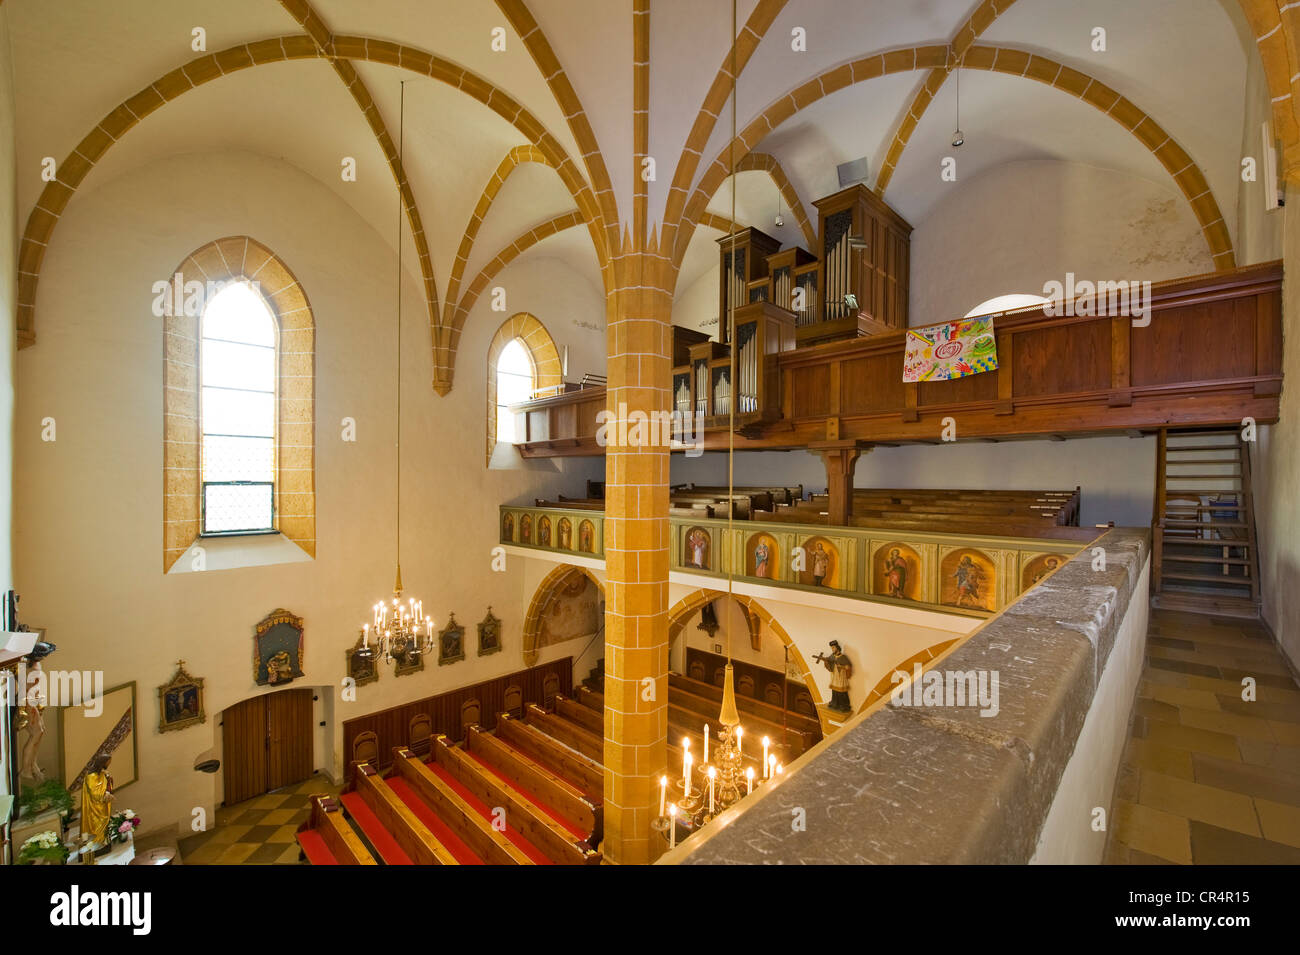 Two-aisled nave with a central column, Church of St. Vitus, Edlitz, Bucklige Welt, Lower Austria, Austria, Europe Stock Photo